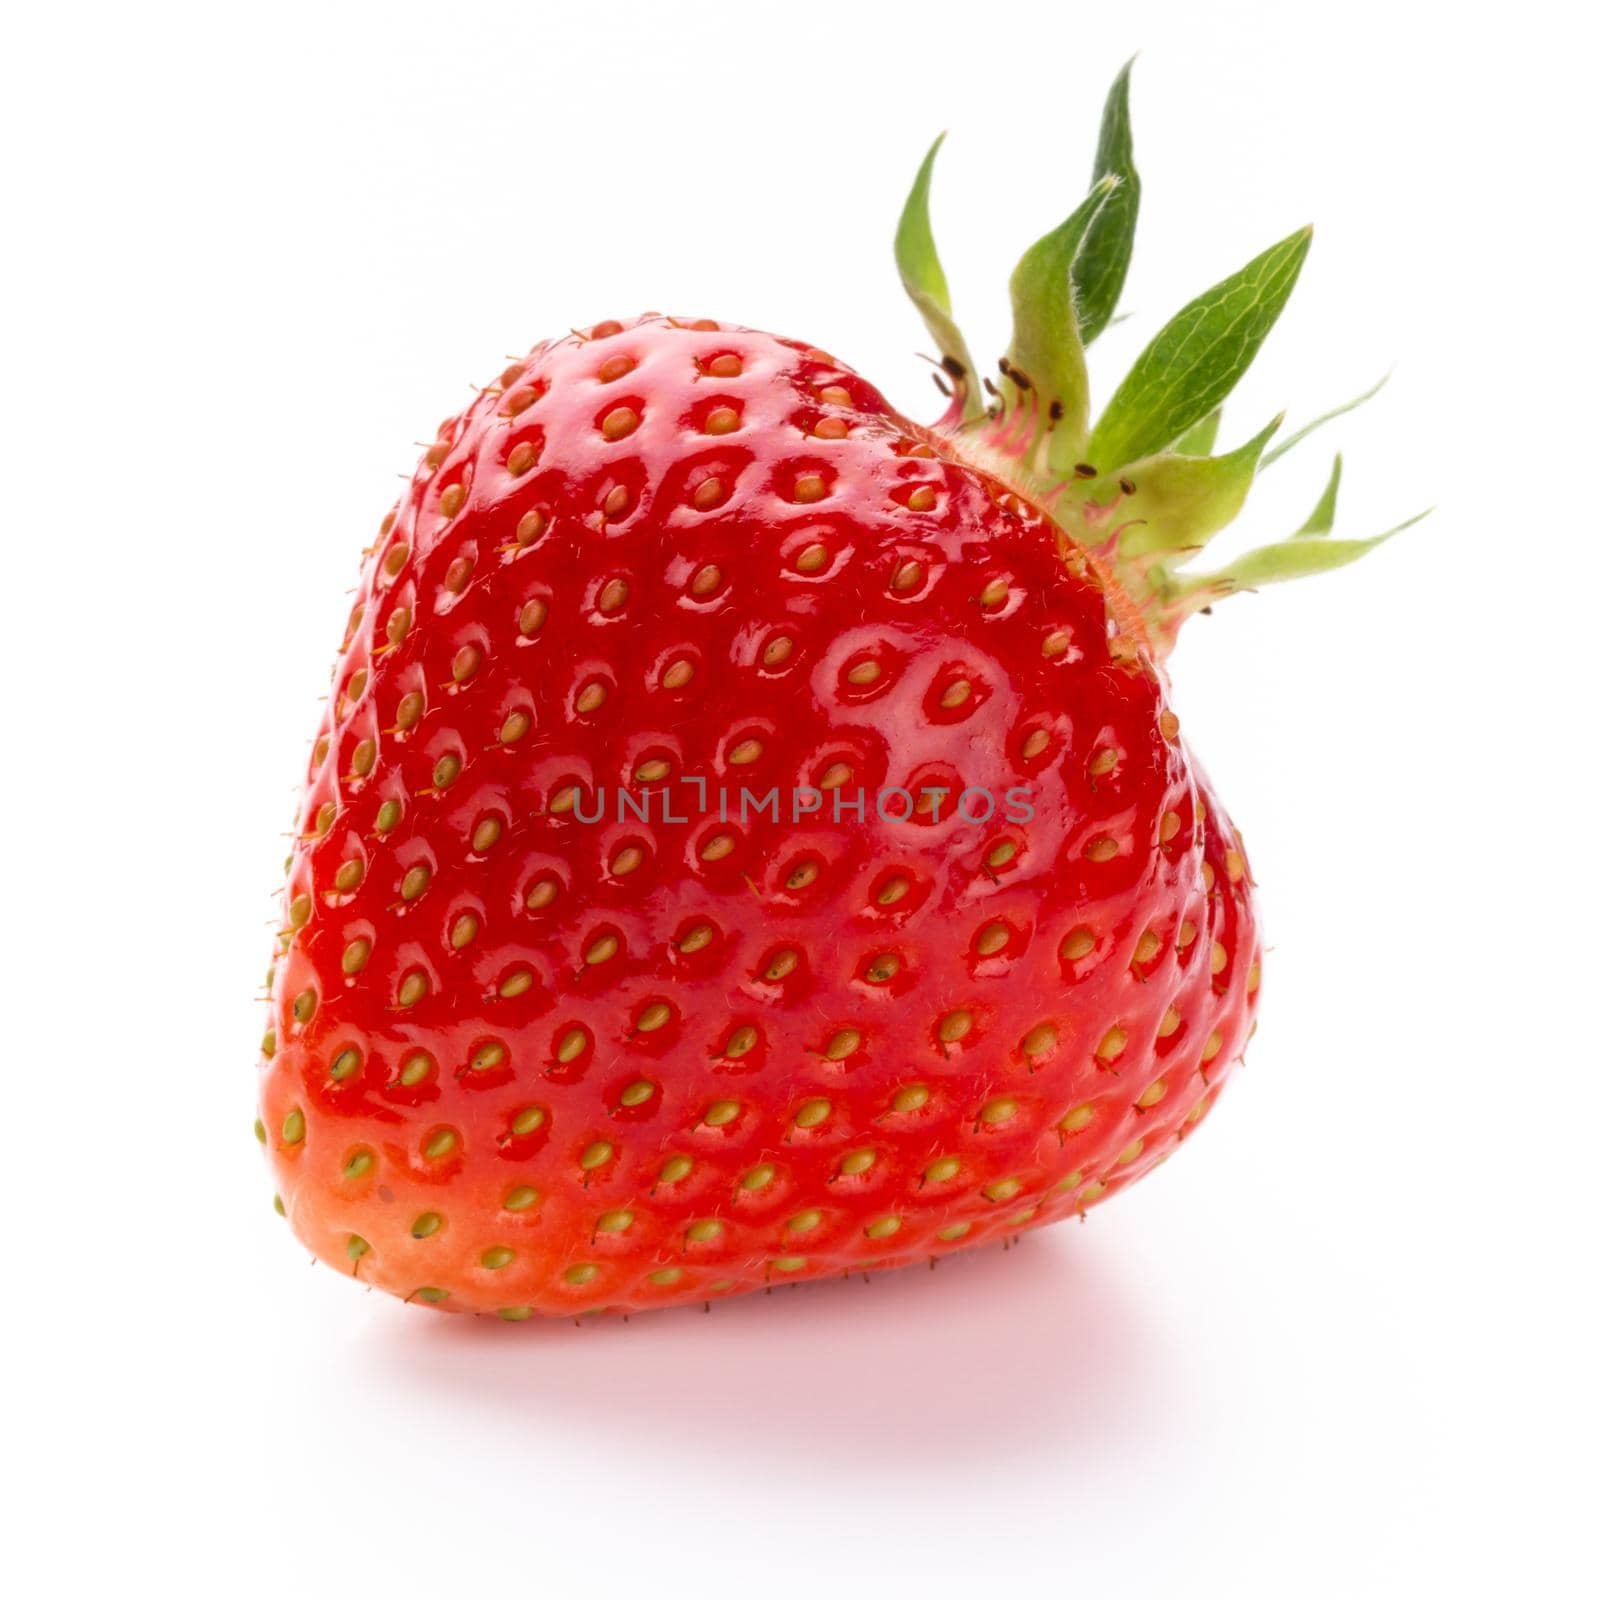 Fresh strawberries closeup on a white background. Isolated - Image by gitusik